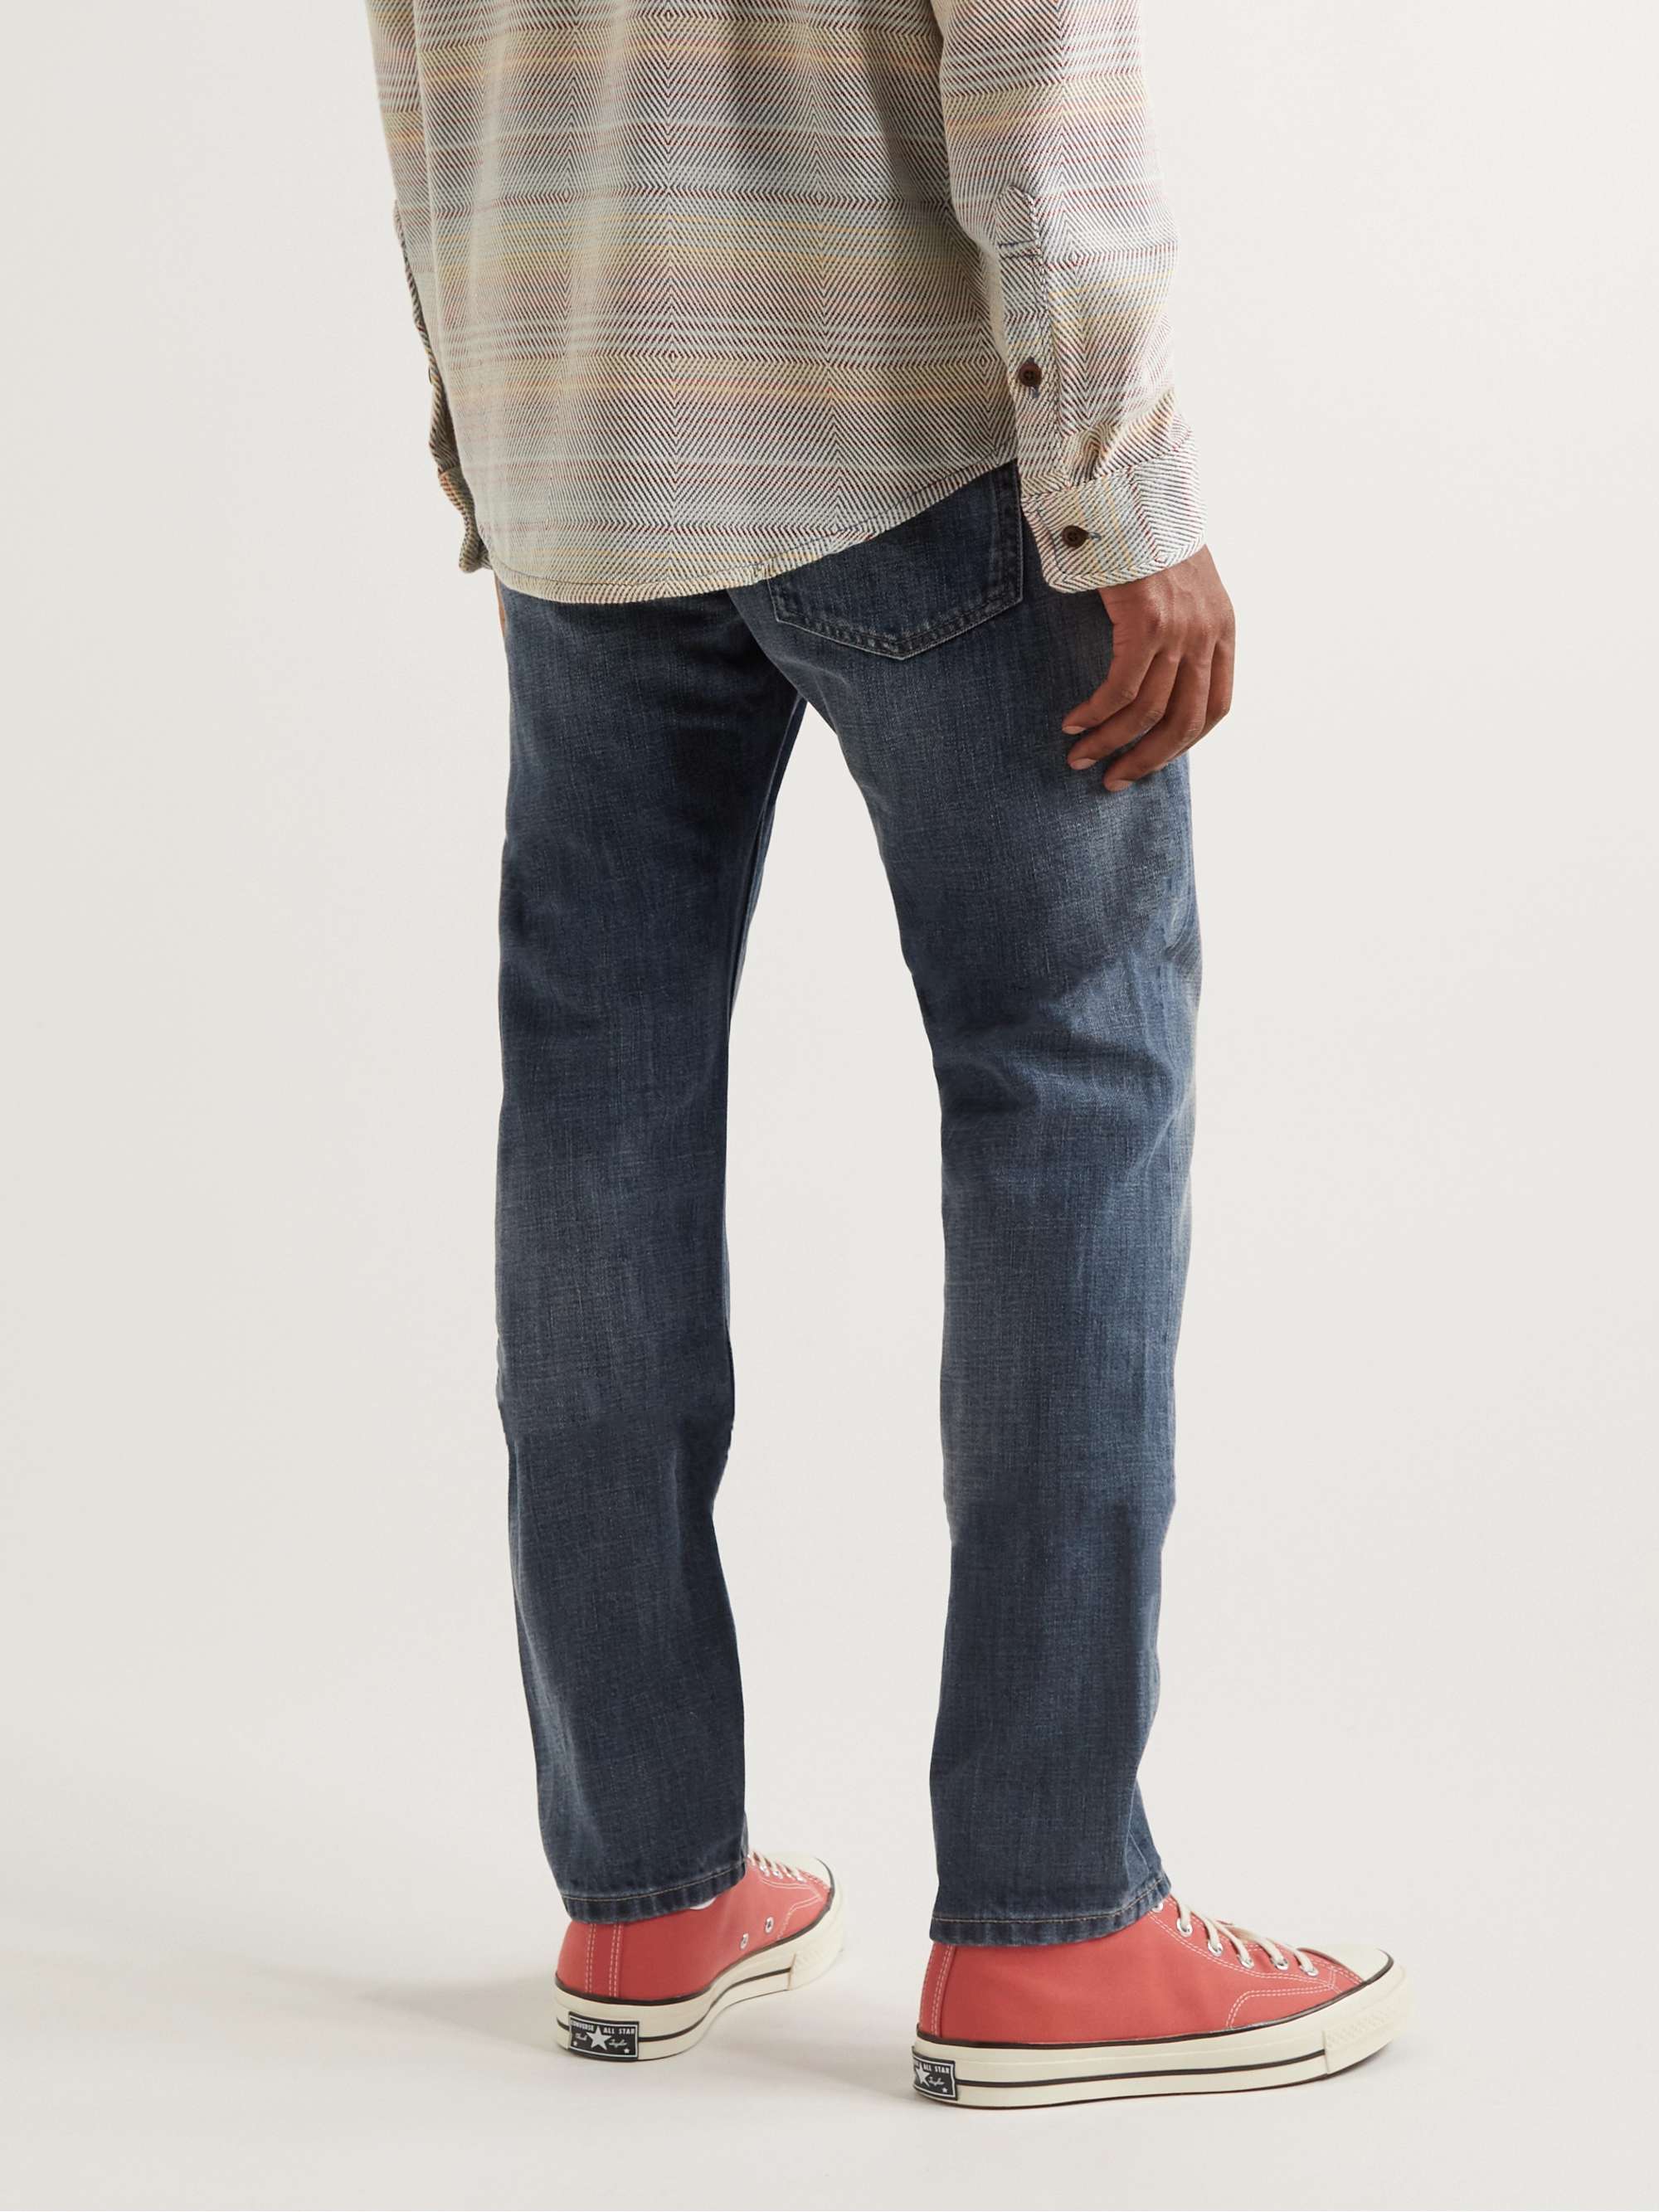 OUTERKNOWN Ambassador Slim-Fit Organic Jeans